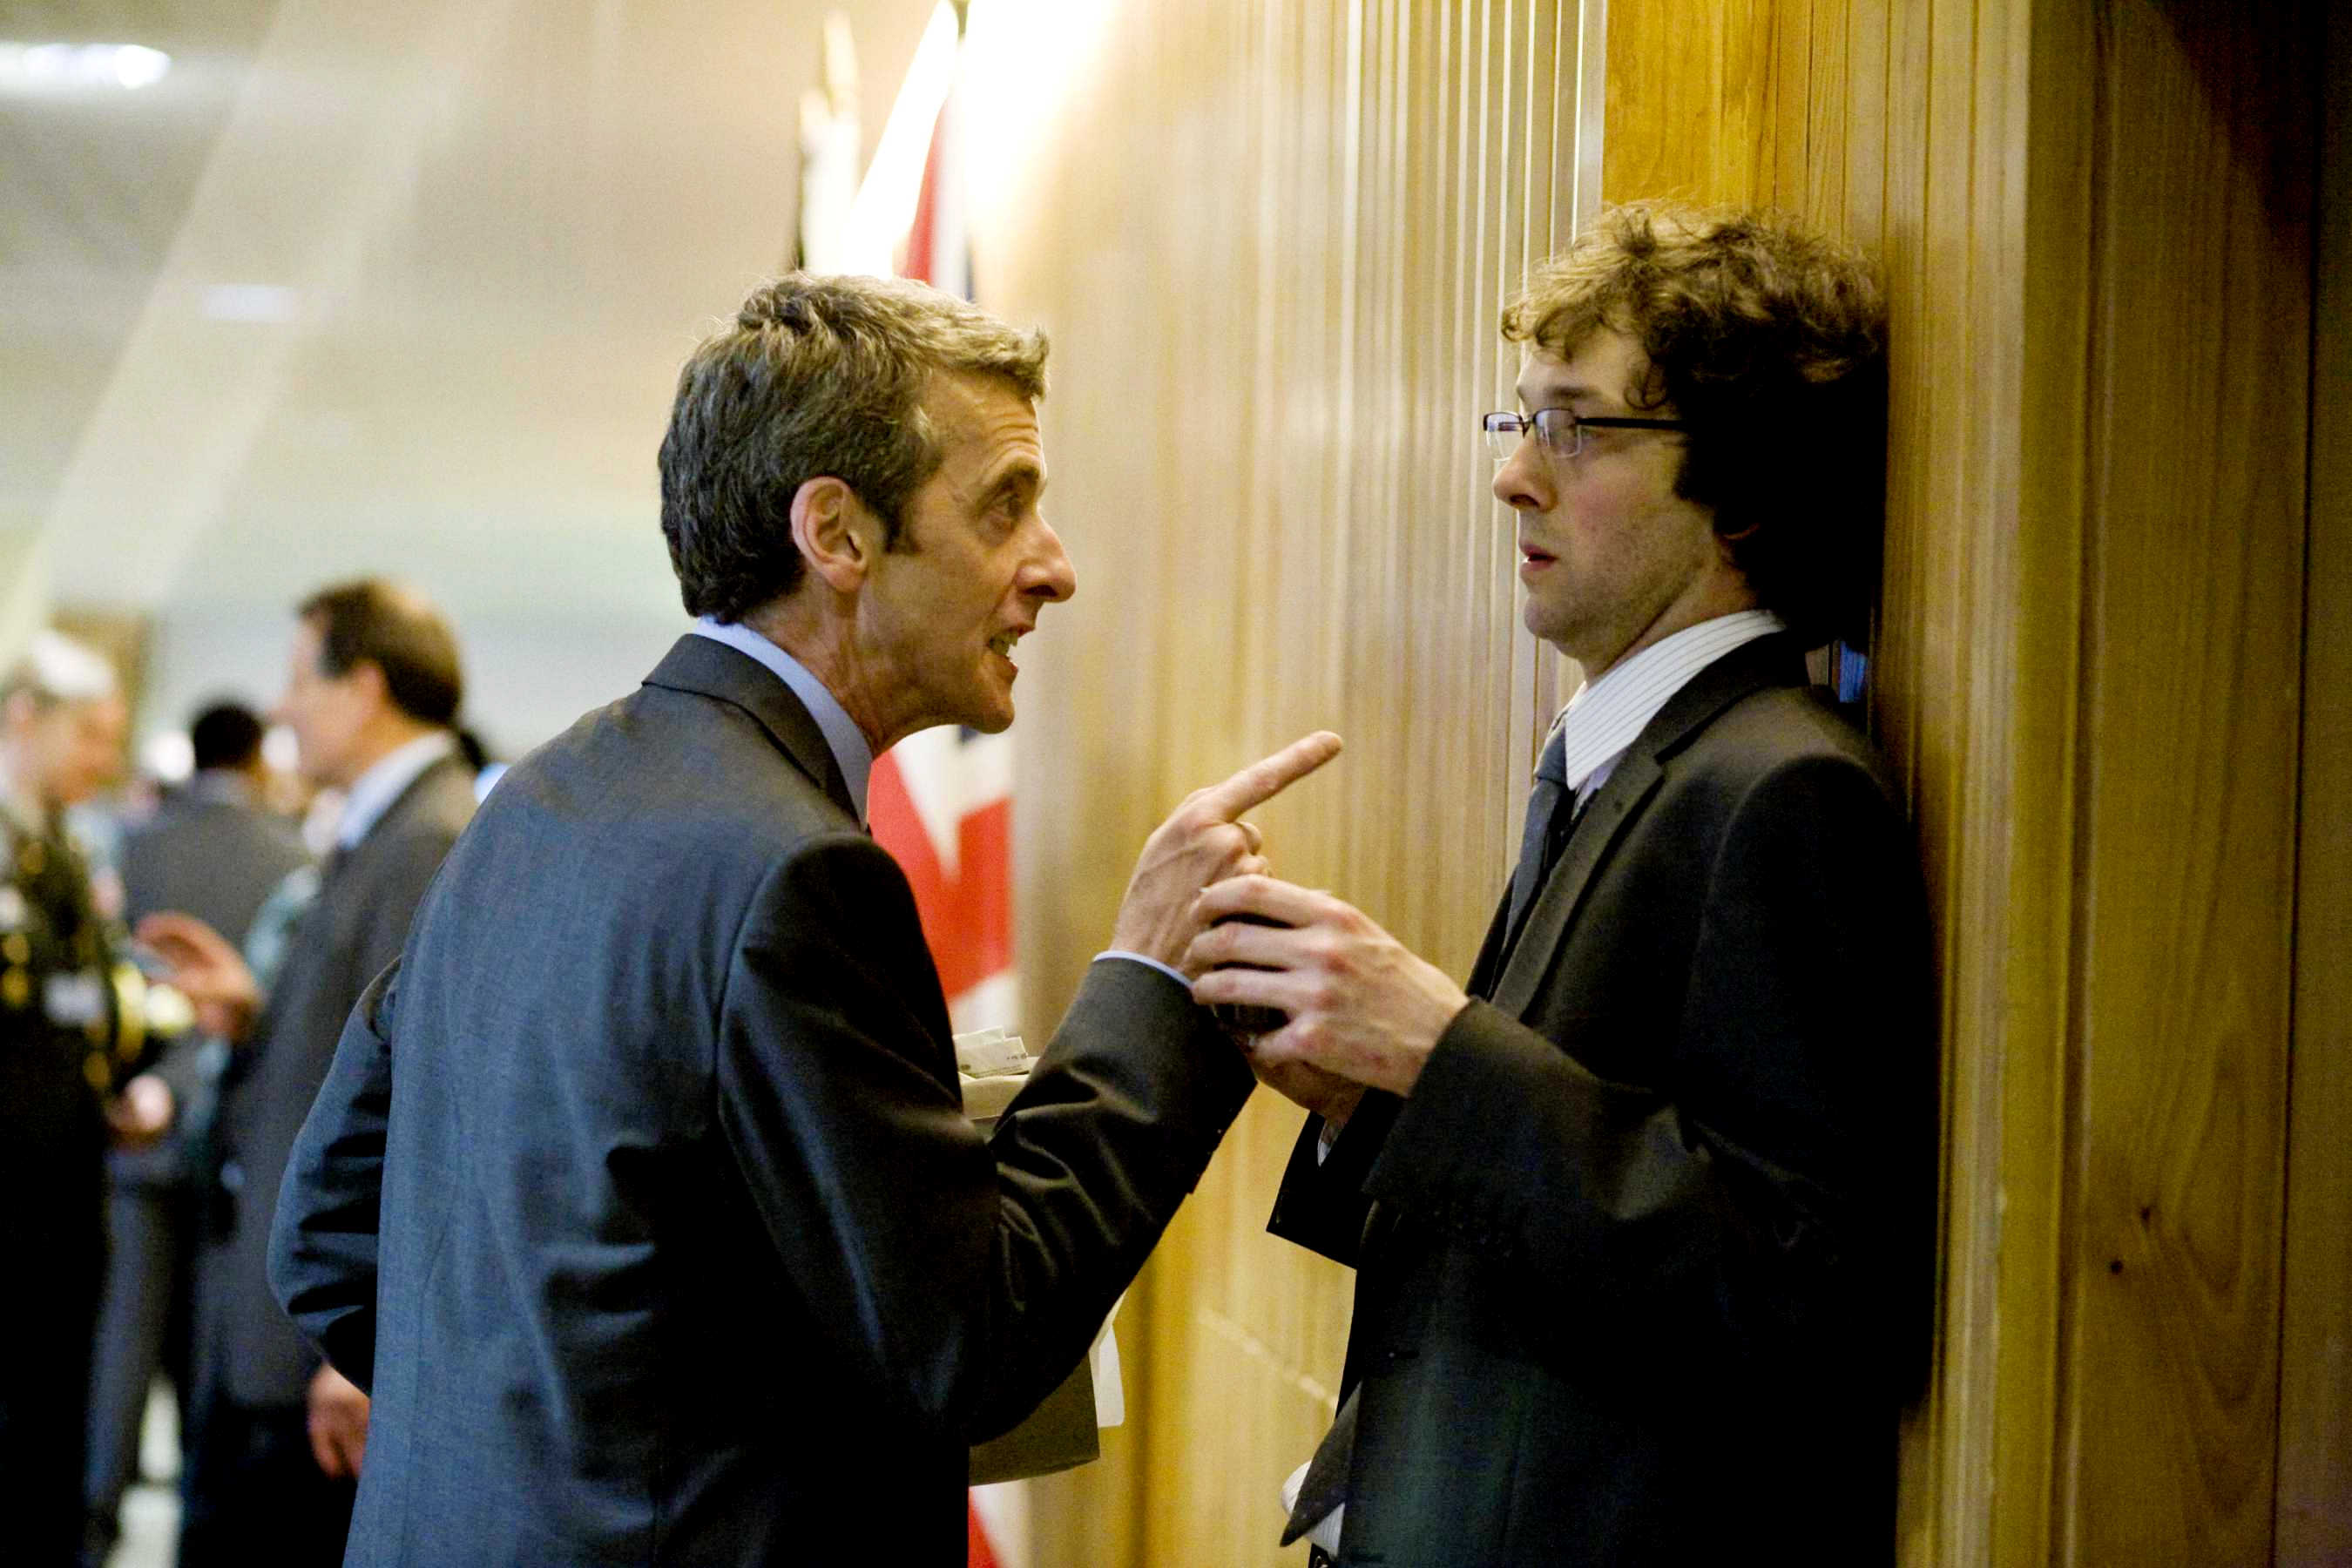 Peter Capaldi stars as Malcolm Tucker and Chris Addison stars as Toby Wright in IFC Films' In the Loop (2009). Photo credit by Nicola Dove.